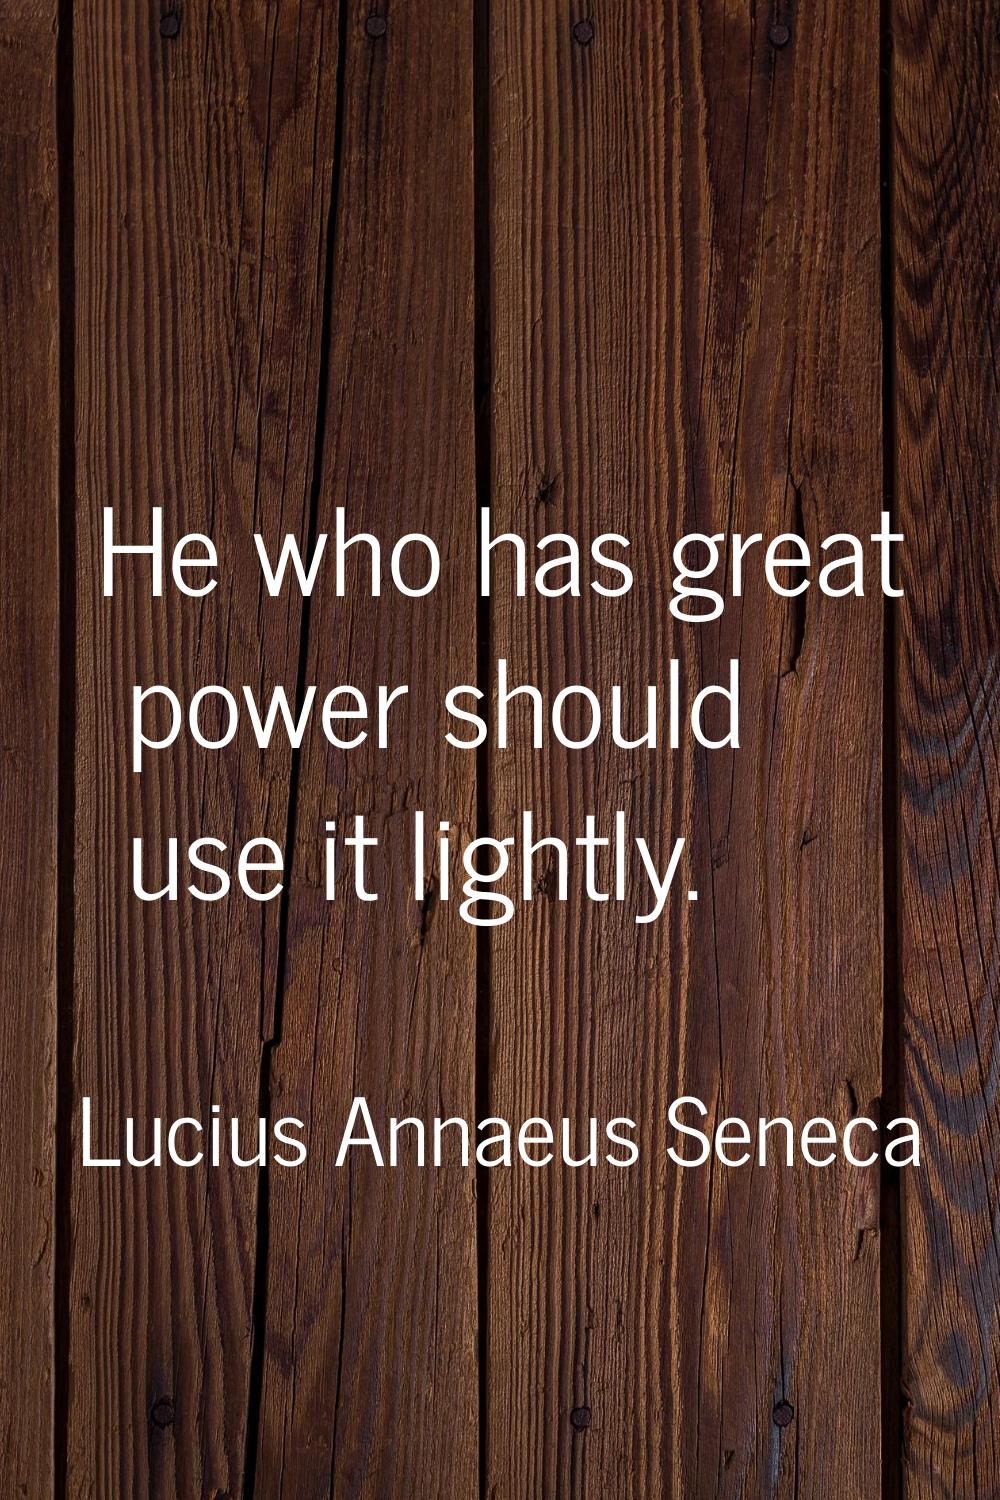 He who has great power should use it lightly.